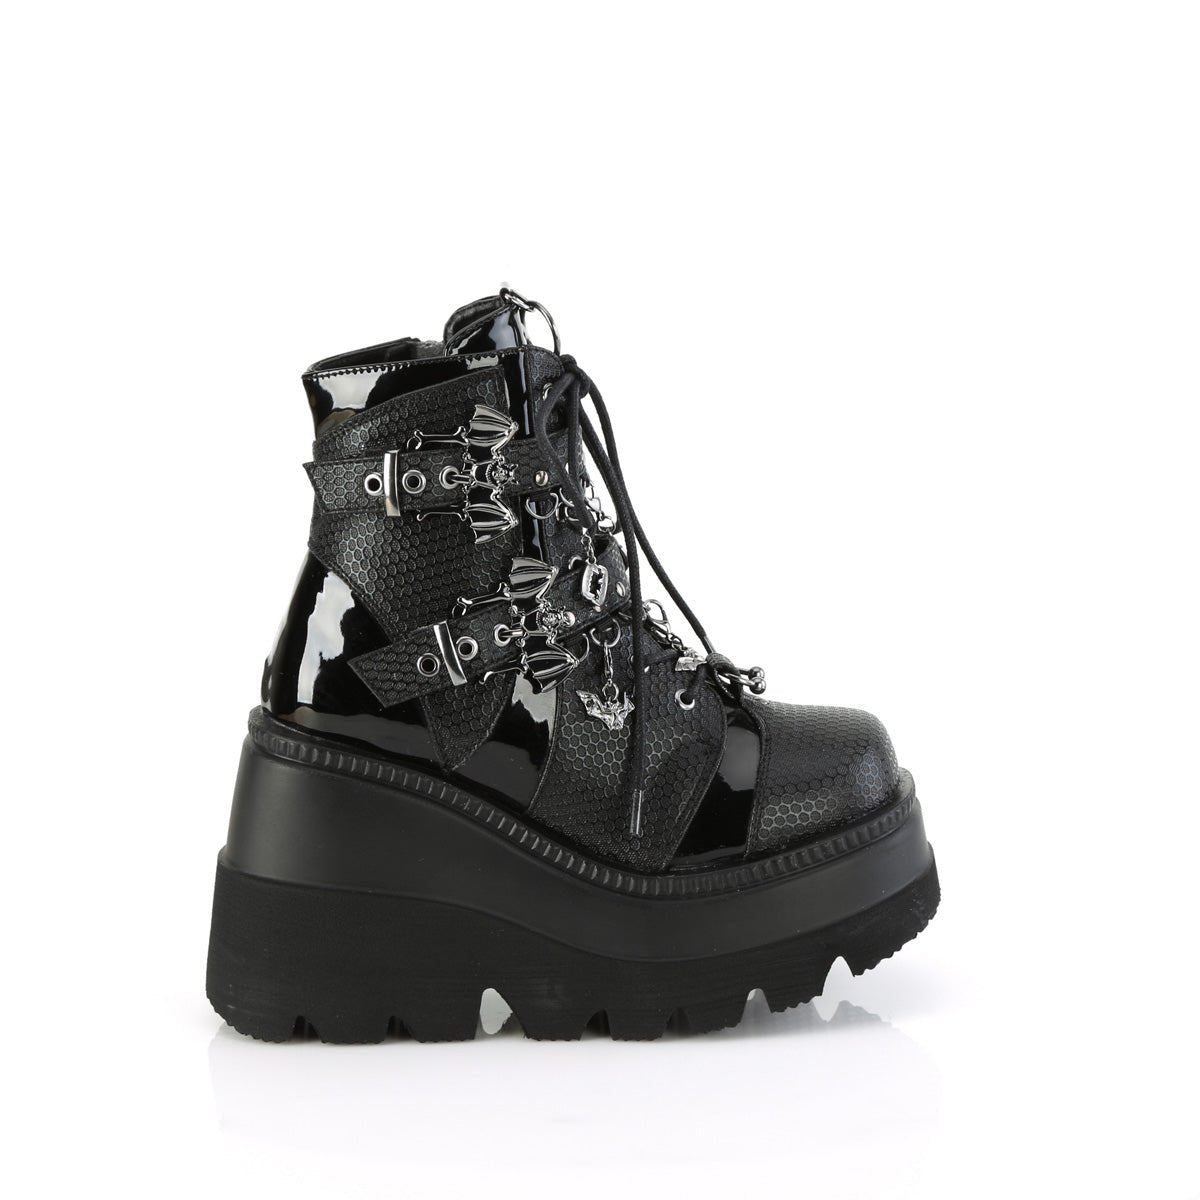 Too Fast | Demonia Shaker 66 | Black Vegan Leather Women's Ankle Boots